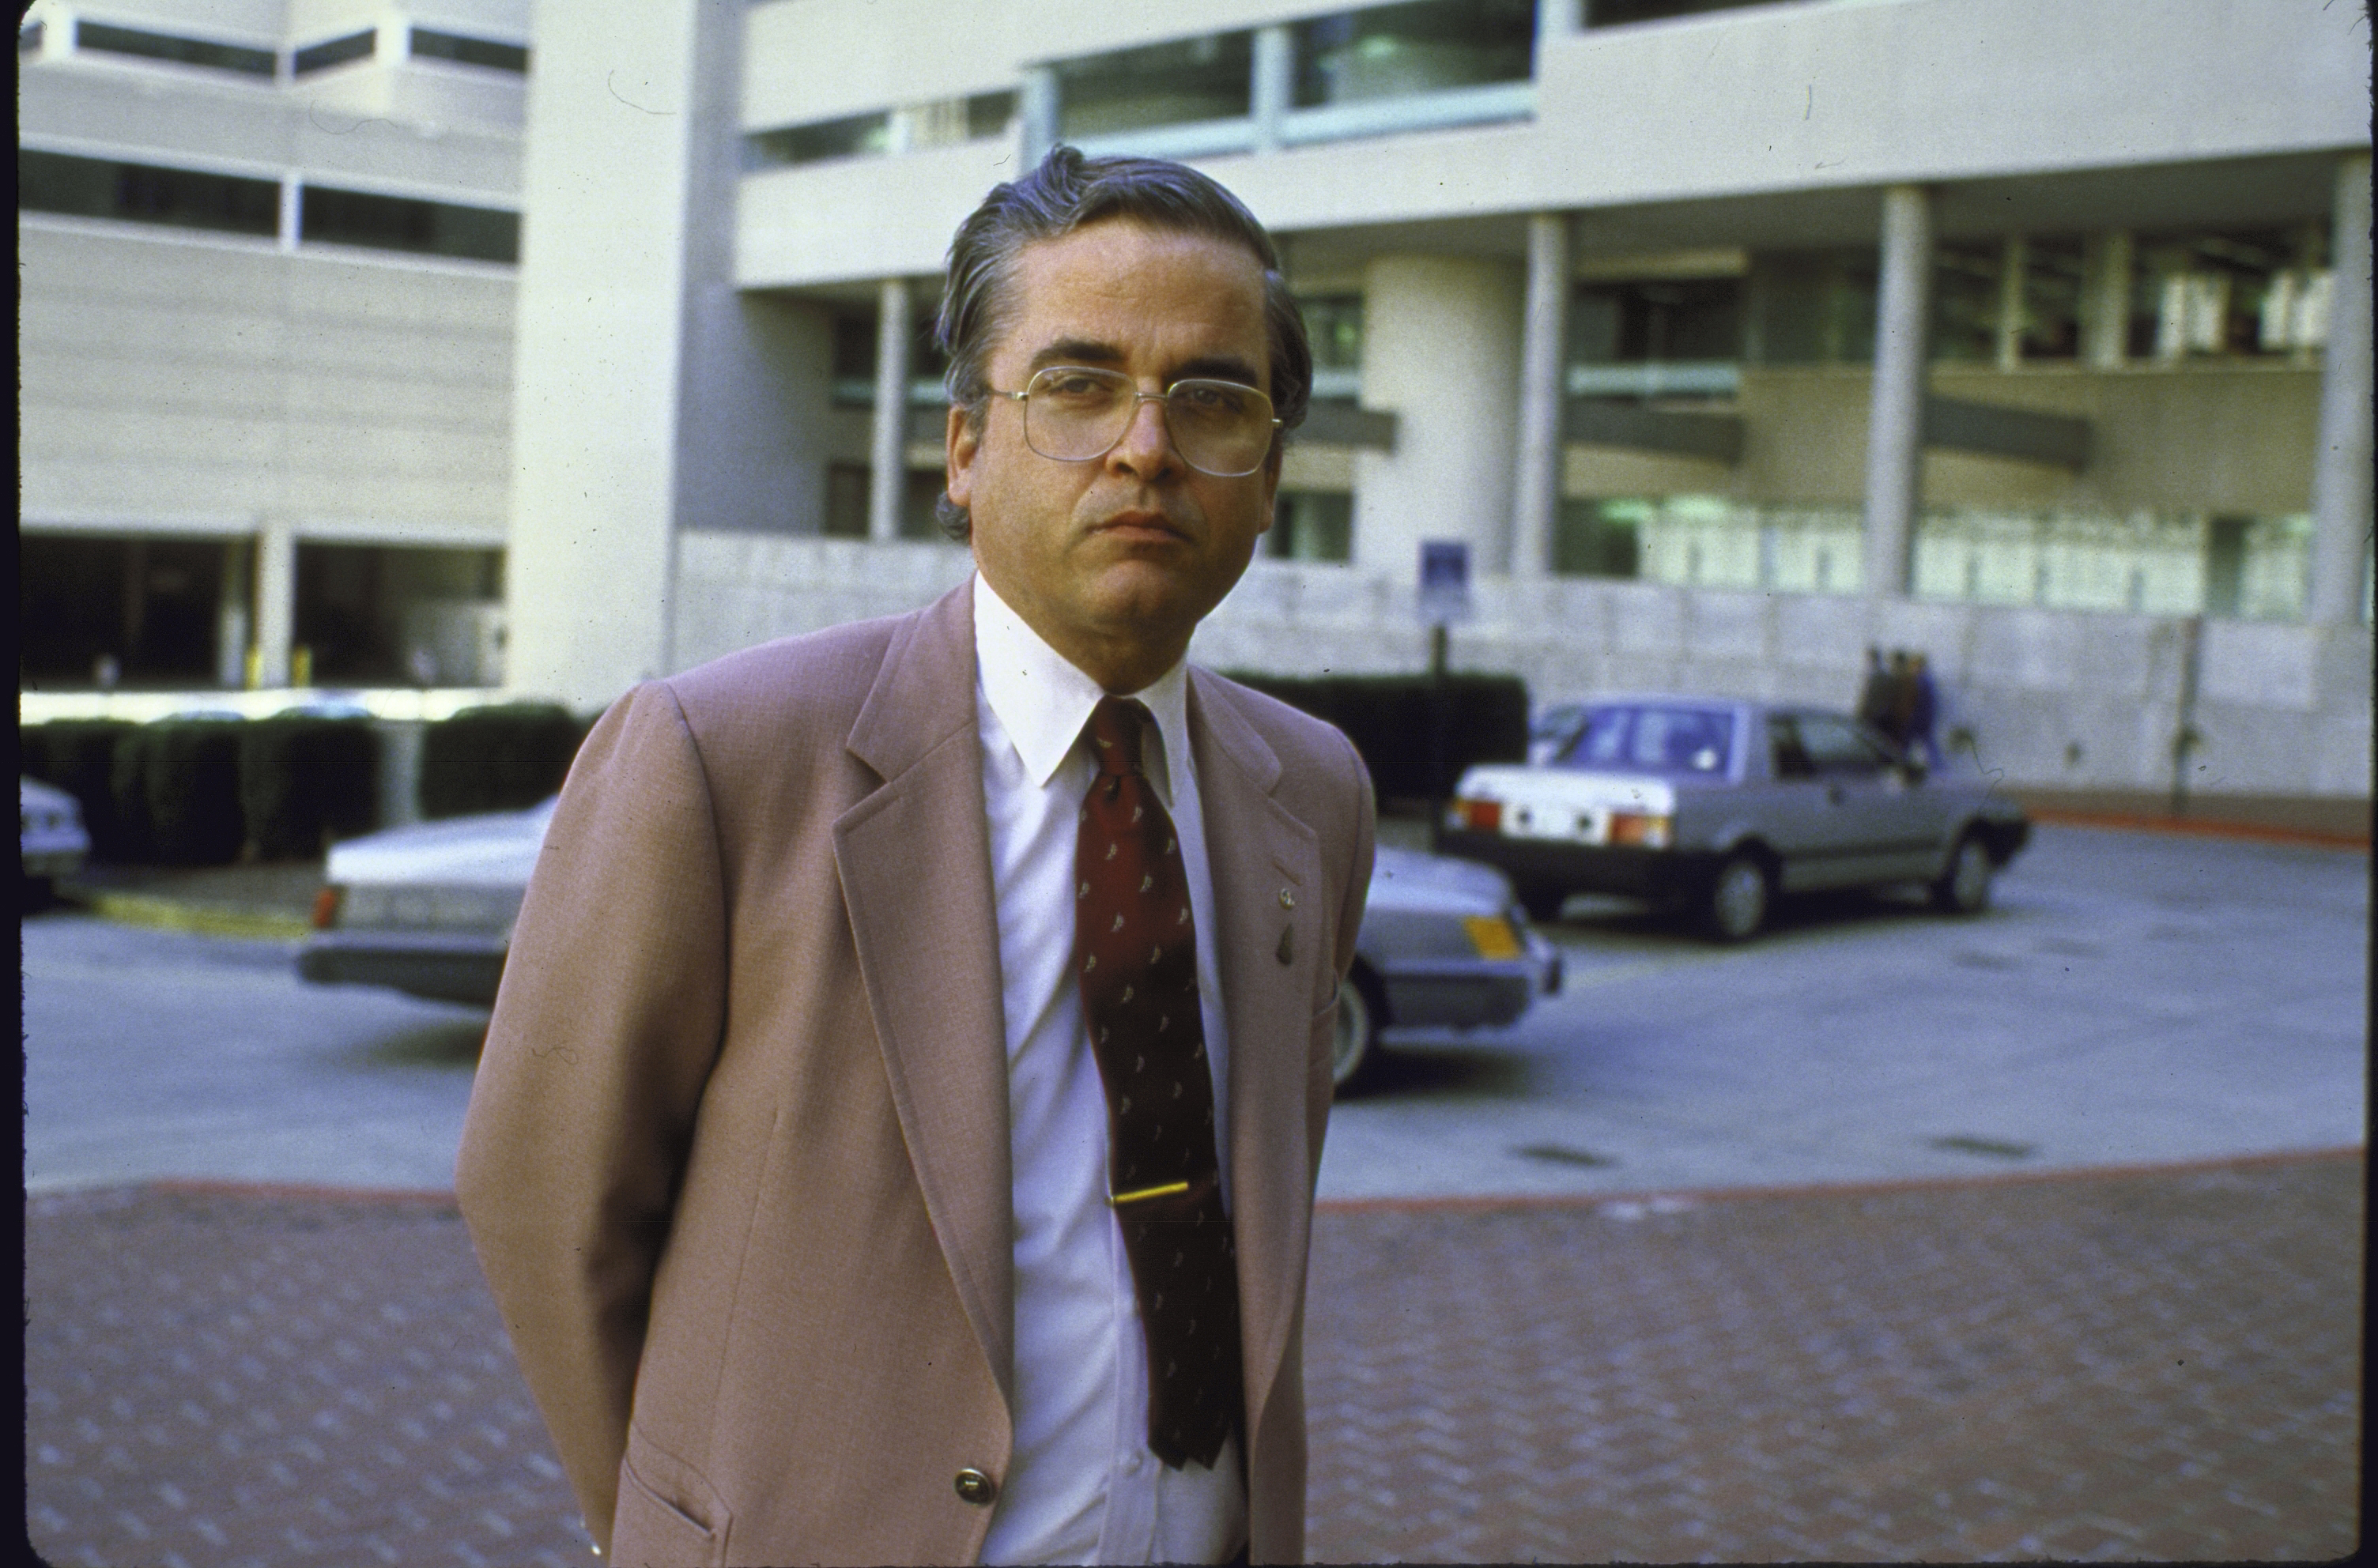 This 1985 file photo shows Samuel Loring Morison, after he was found guilty under Espionage Act of selling photos to Jane's Defense Weekly. (Marty Katz&mdash;The LIFE Images Collection/Getty)